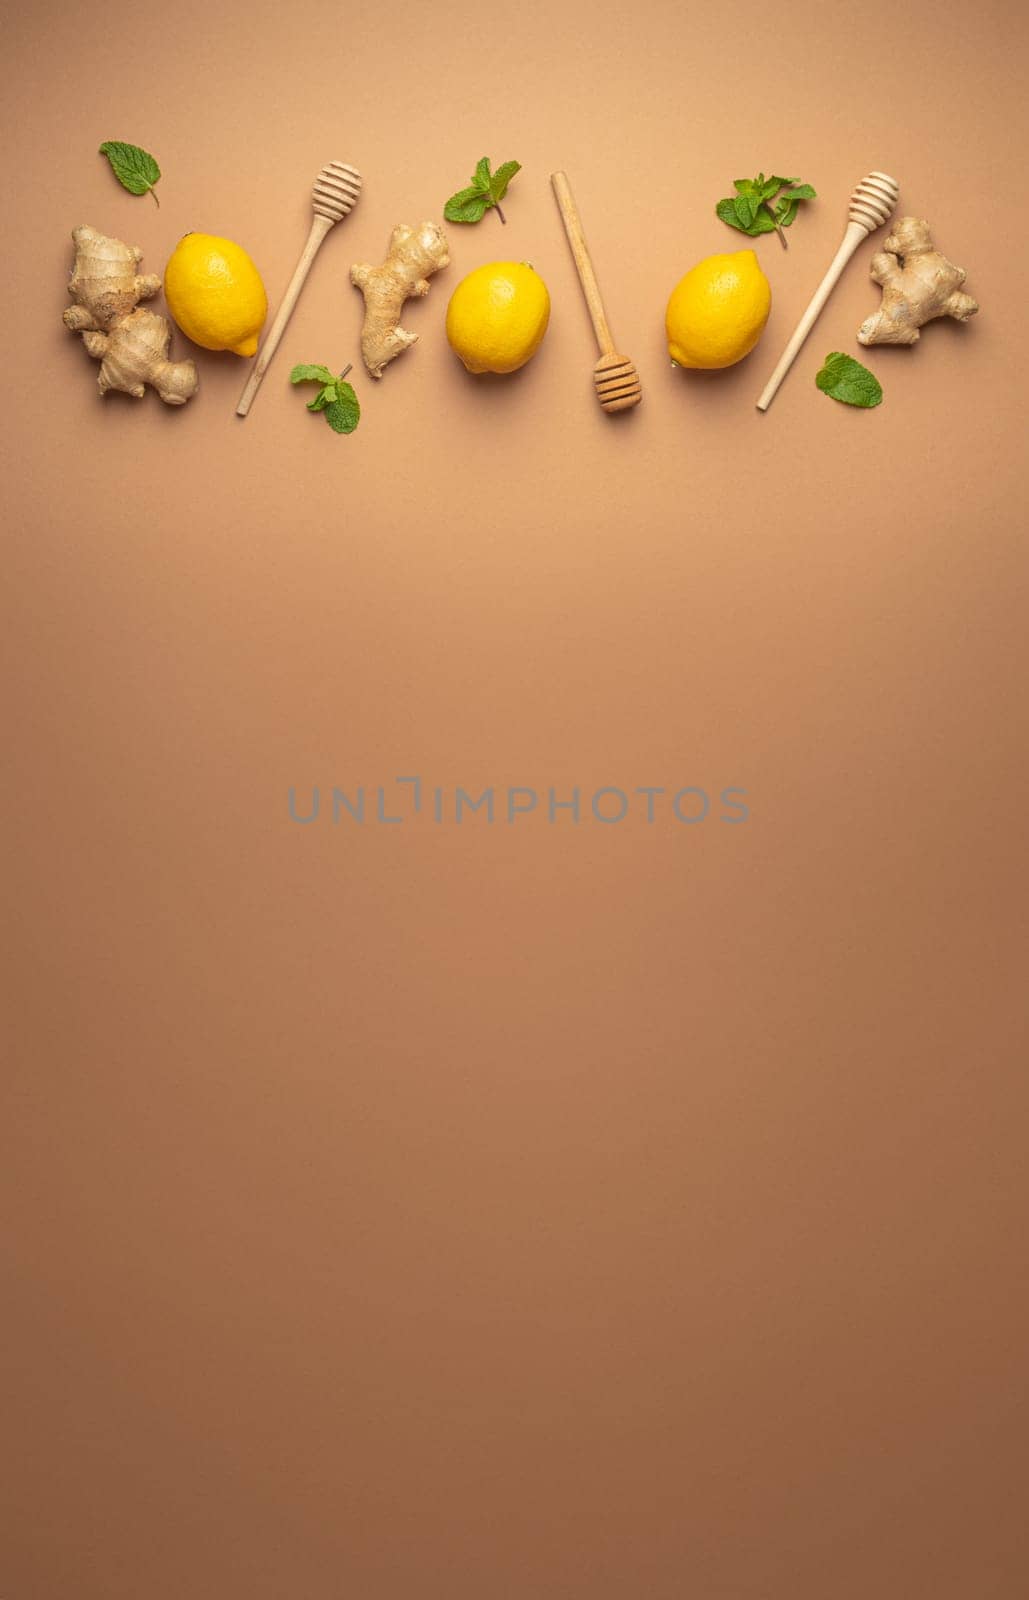 Composition with lemons, mint, ginger top view on simple beige background. Food for immunity stimulation and against seasonal flu. Healthy natural remedies to boost immune system.